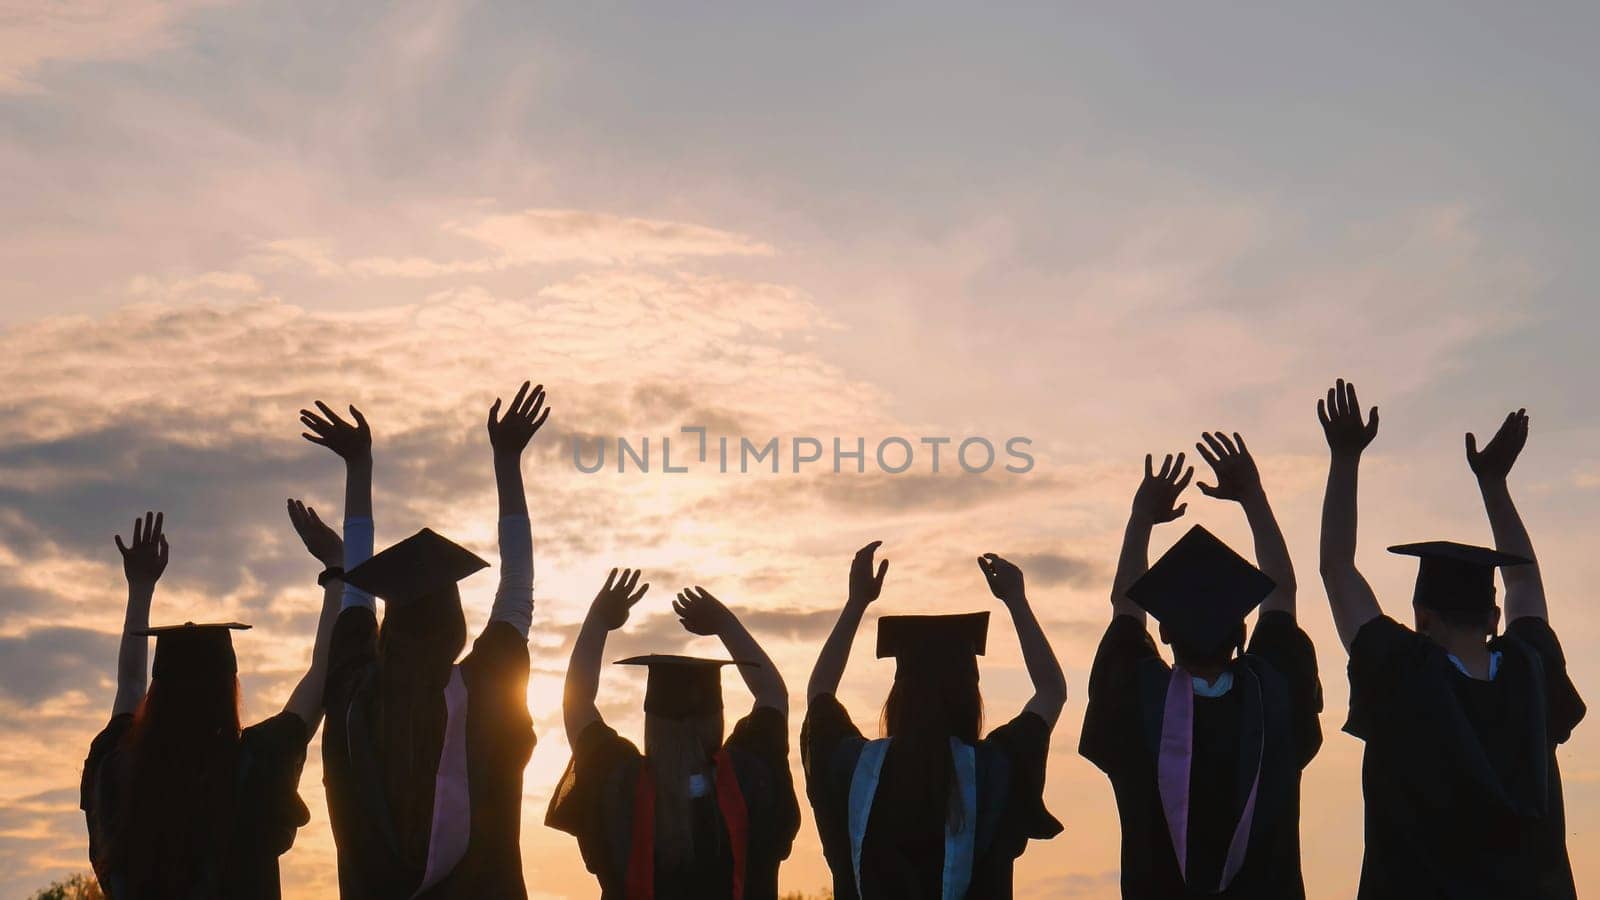 Silhouettes of graduates in black robes waving their arms against the evening sunset. by DovidPro